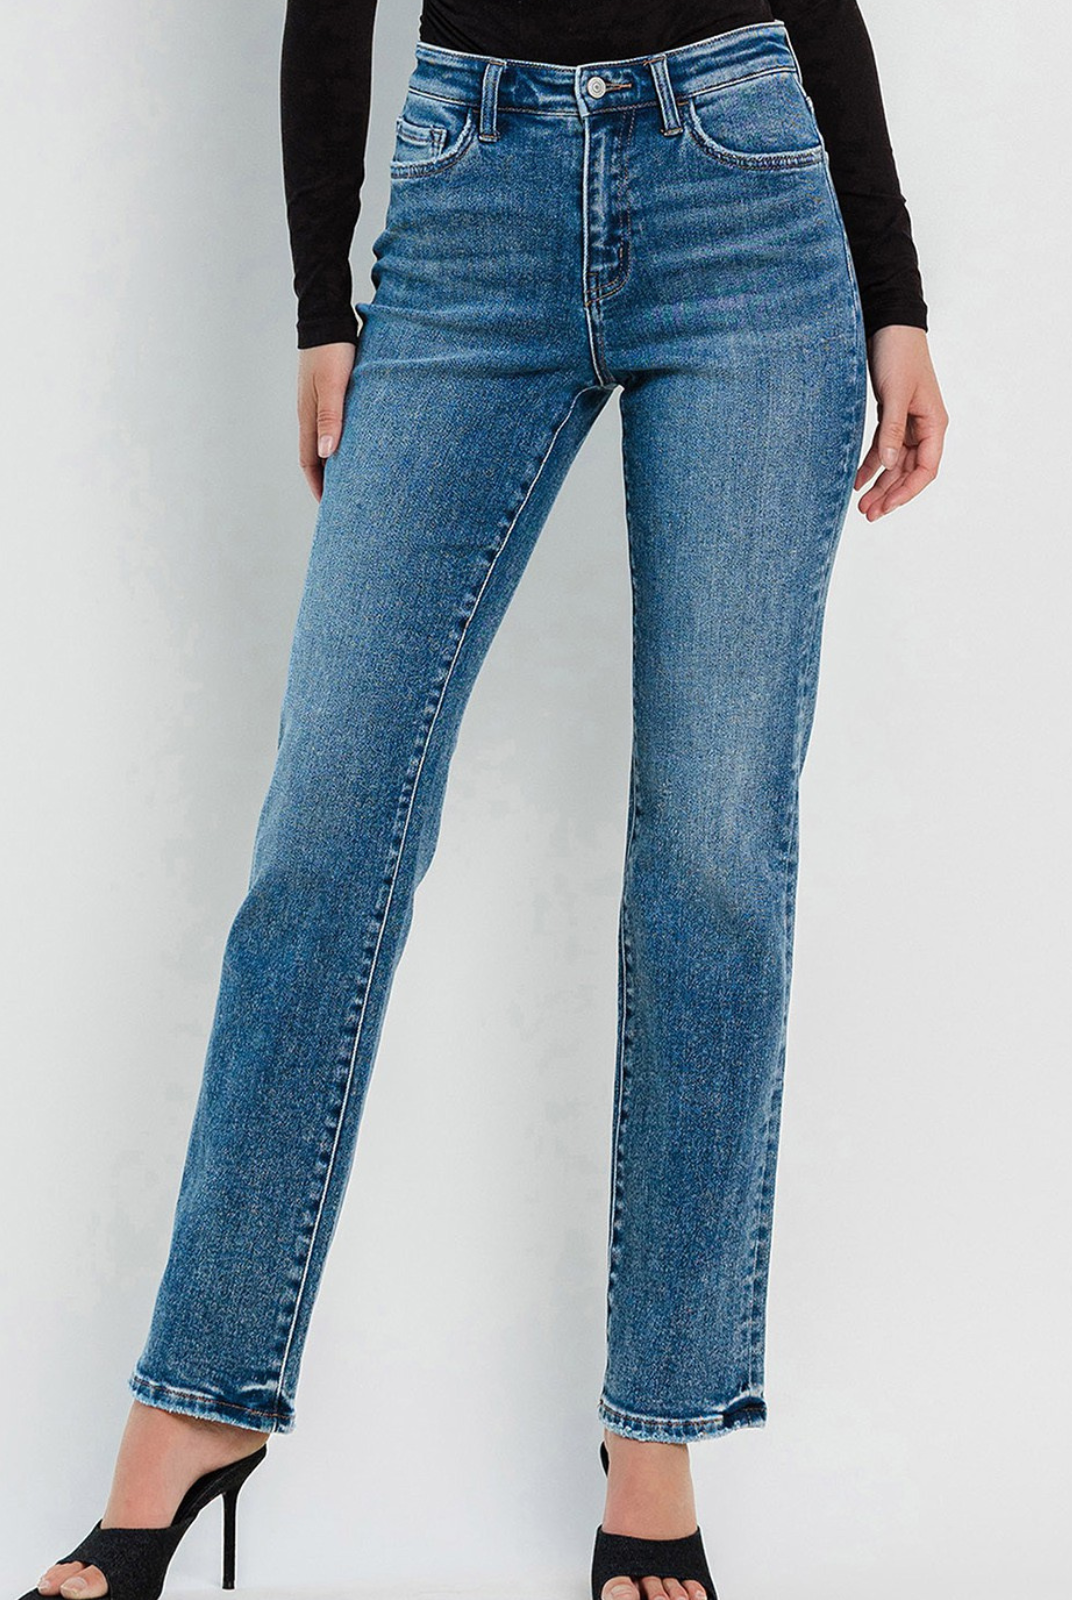 Flying Monkey High Rise Straight. Slip into the ultimate comfort and style with our Illuminate High Rise Straight Jeans. Made with stretch denim, they provide all-day comfort and a flattering fit. The high rise waist accentuates your figure while the full length and straight cut give you a sleek and versatile look. 